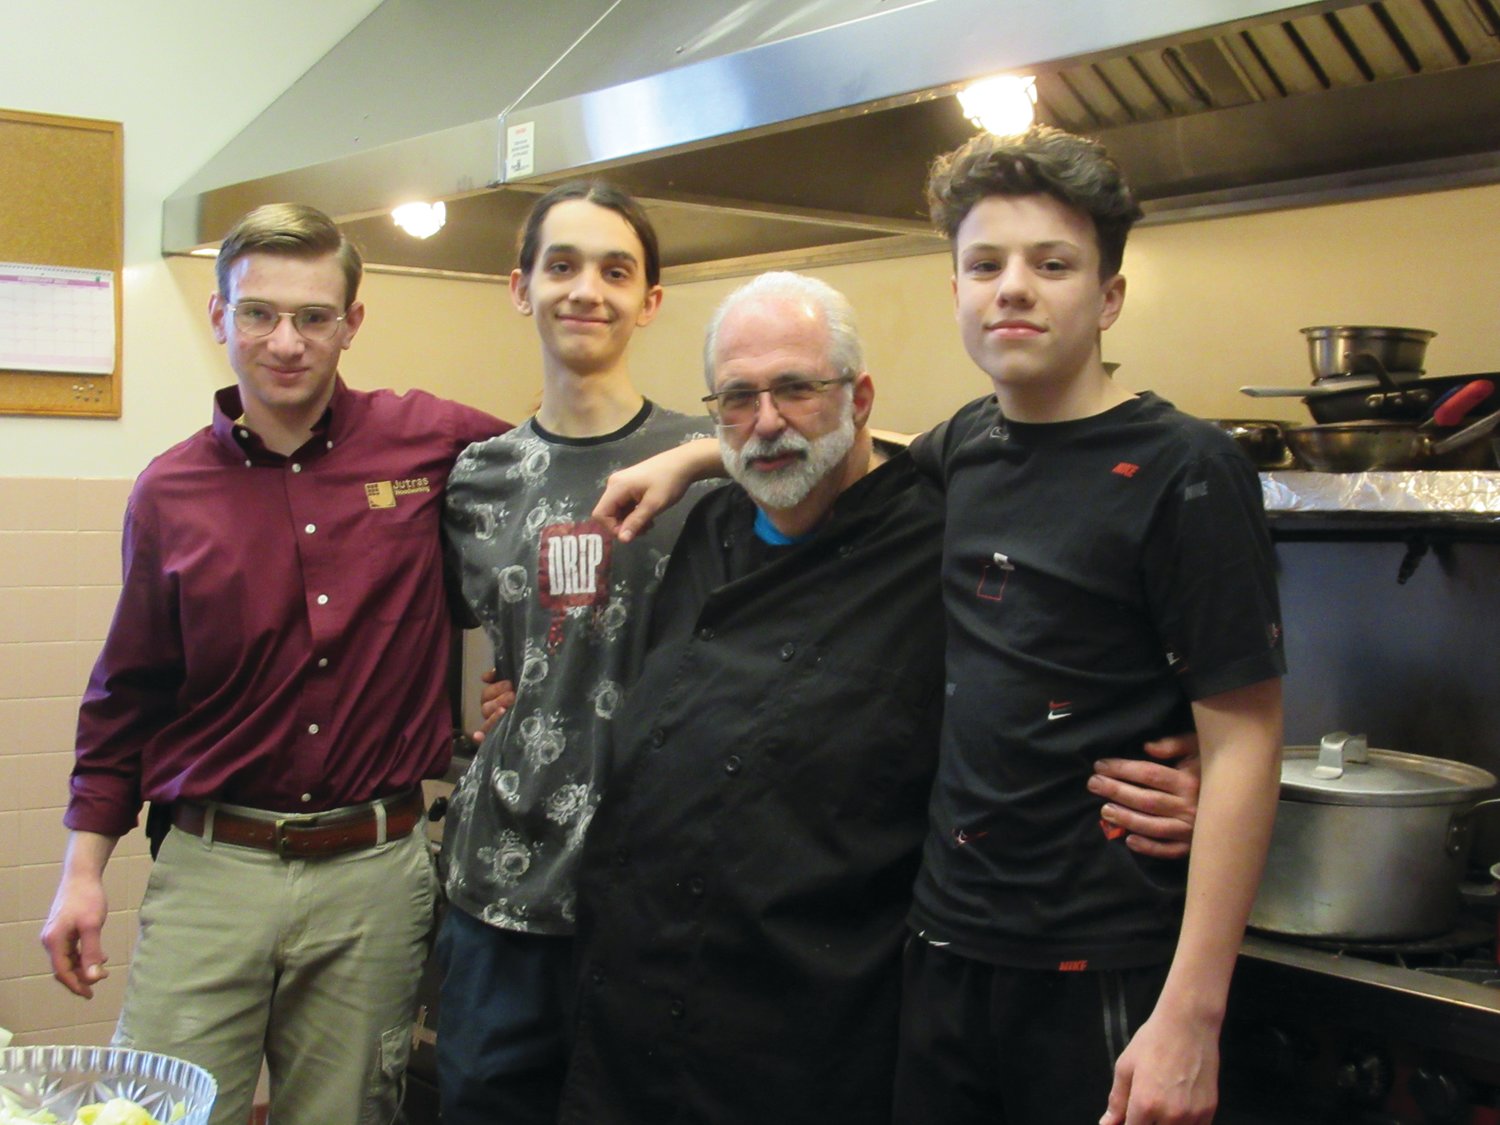 HELPING HANDS: OLG Chef Mike Lombardi is joined by members of the parish’s confirmation class who performed many duties in and out of the kitchen during Saturday’s St. Joseph’s Day Party.